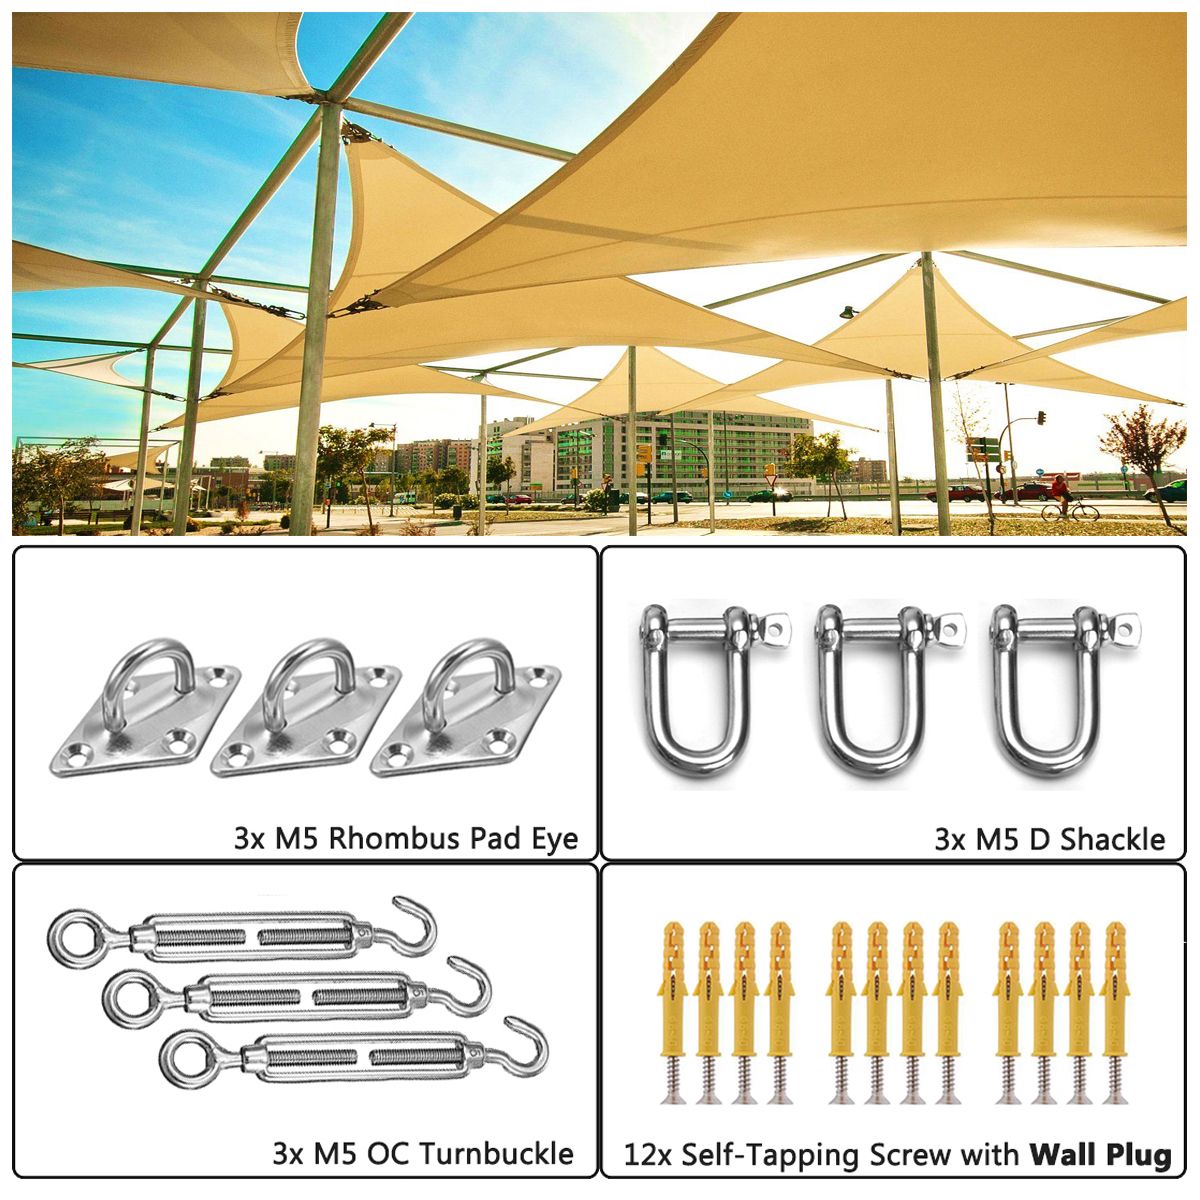 21Pcs-Sun-Shade-Sail-Accessories-for-Triangle-or-Square-Shade-Sail-Replacement-Fitting-Tools-Kit-1392251